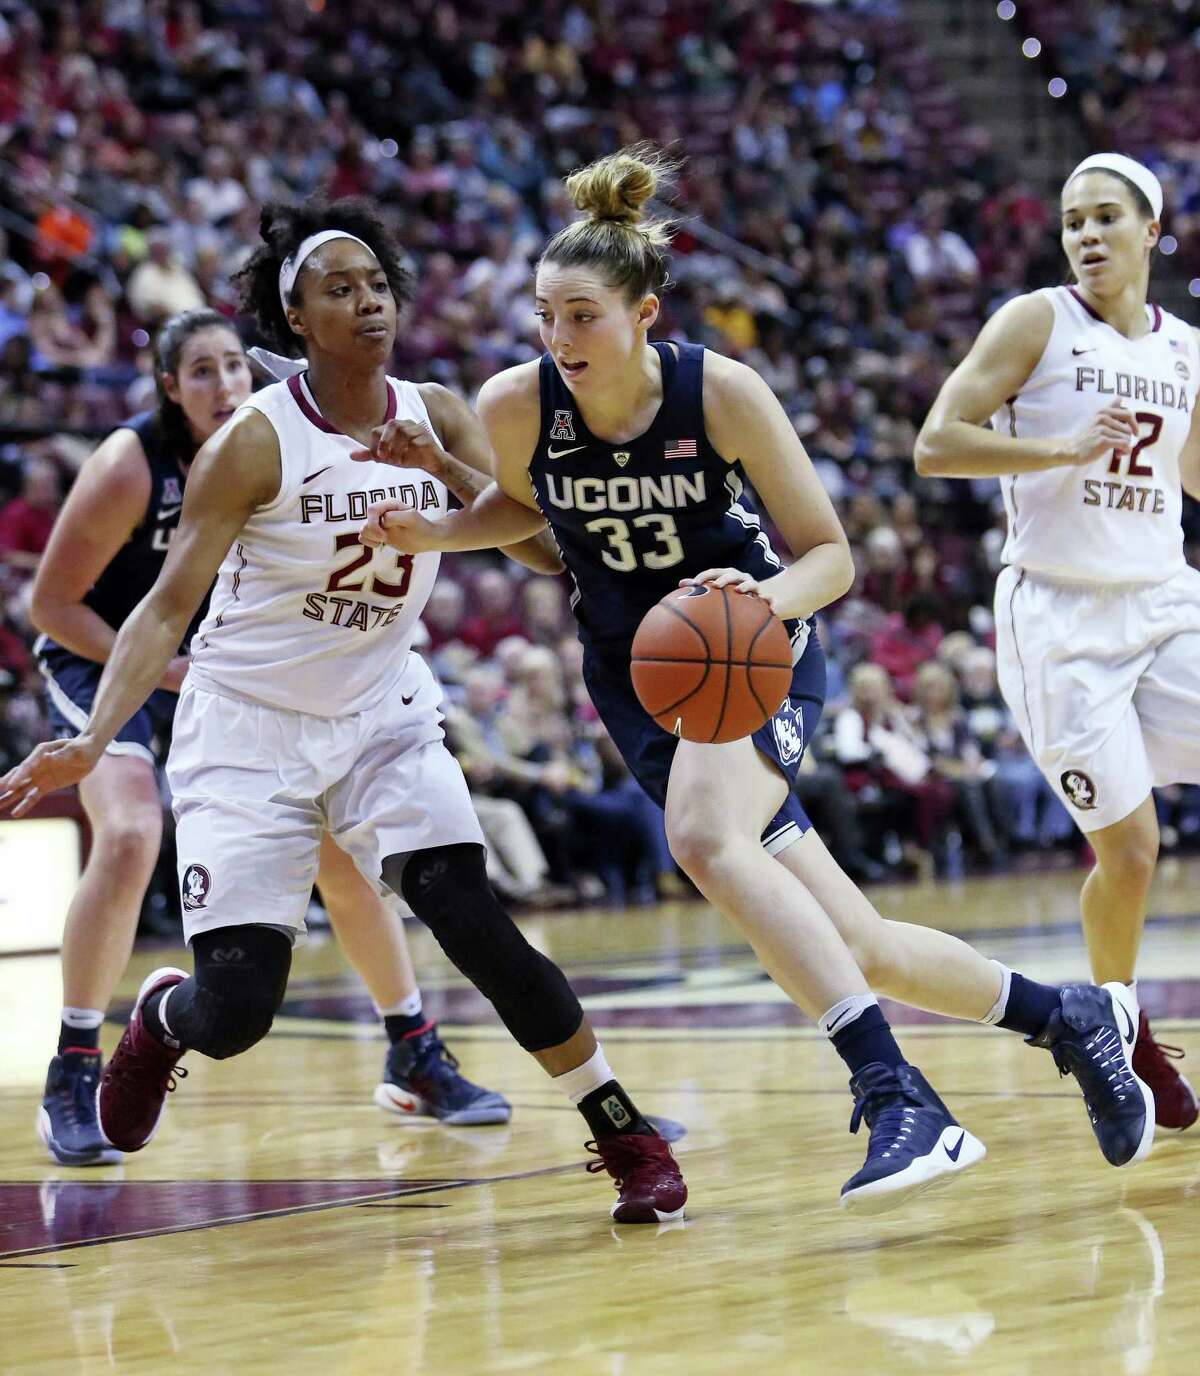 Connecticut’s Katie Lou drives the basketball up court as Florida State’s Ivey Slaughter defends in the second quarter of an NCAA college basketball game, Monday, Nov. 14, 2016, in Tallahassee, Fla. UConn won the game 78-76. (AP Photo/Steve Cannon)